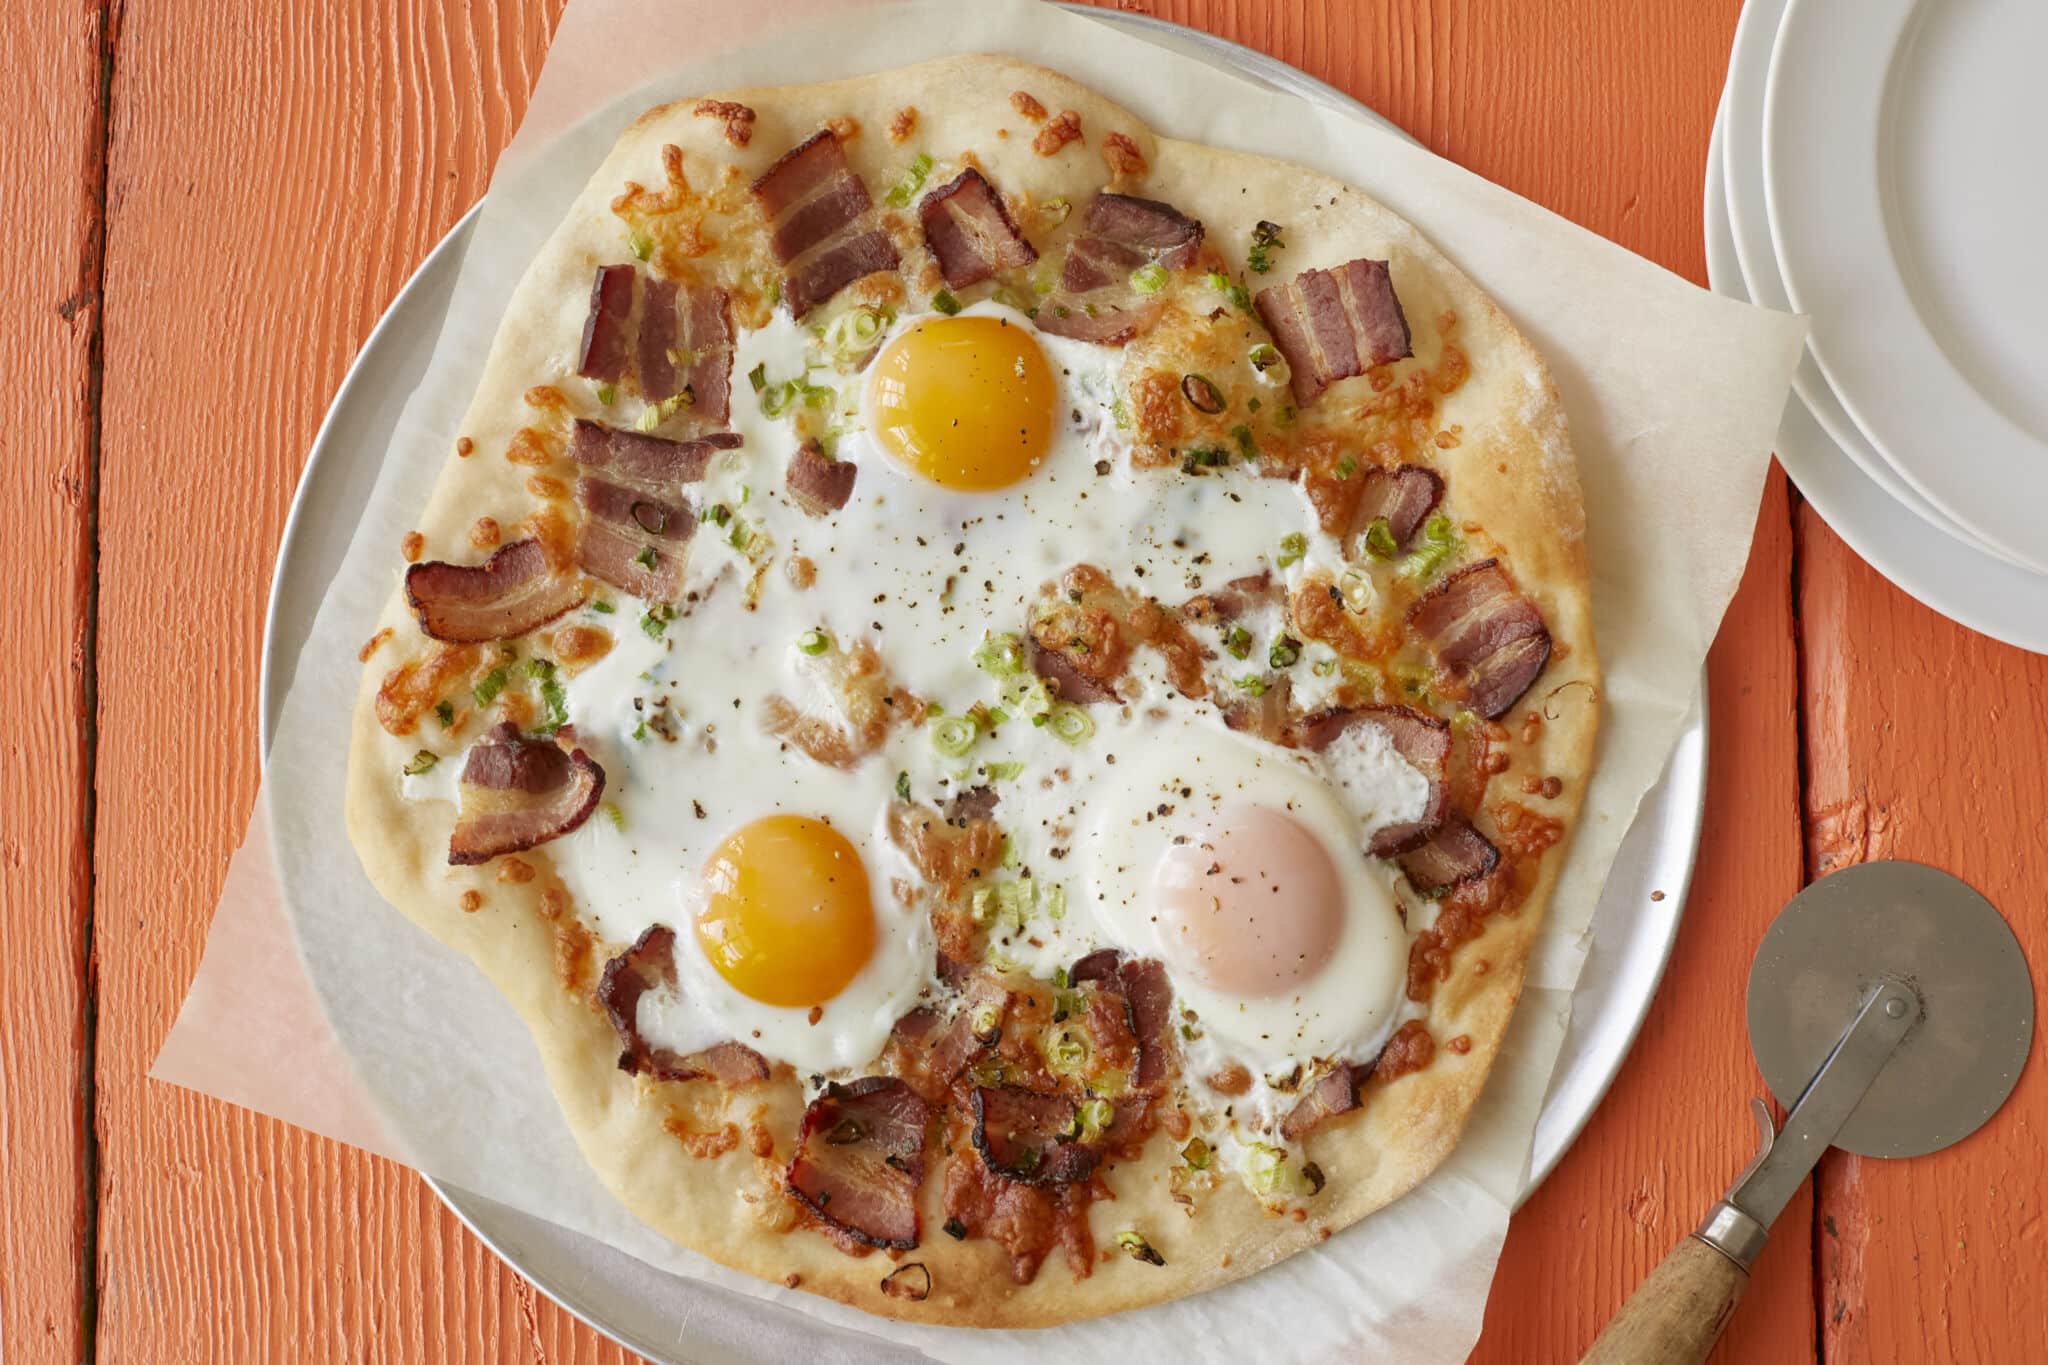 Wholesome breakfast pizza has golden and crispy crust, with smoky bacon, green onions, and sunny-side-up eggs bringing layers of savory flavor.